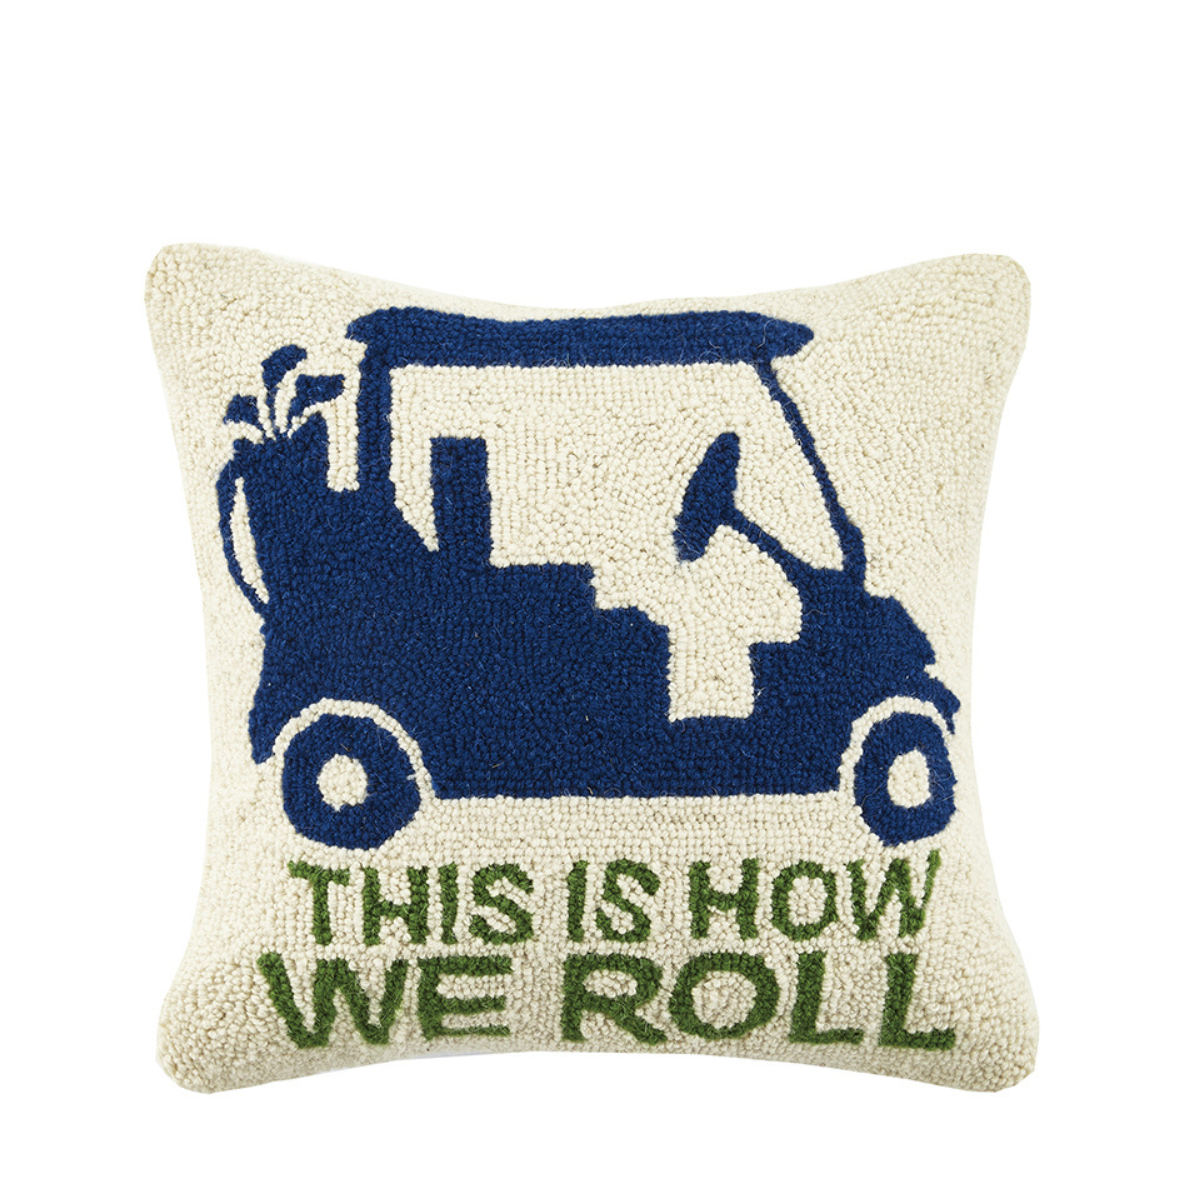 This Is How We Roll Golf Hooked Wool Throw Pillow